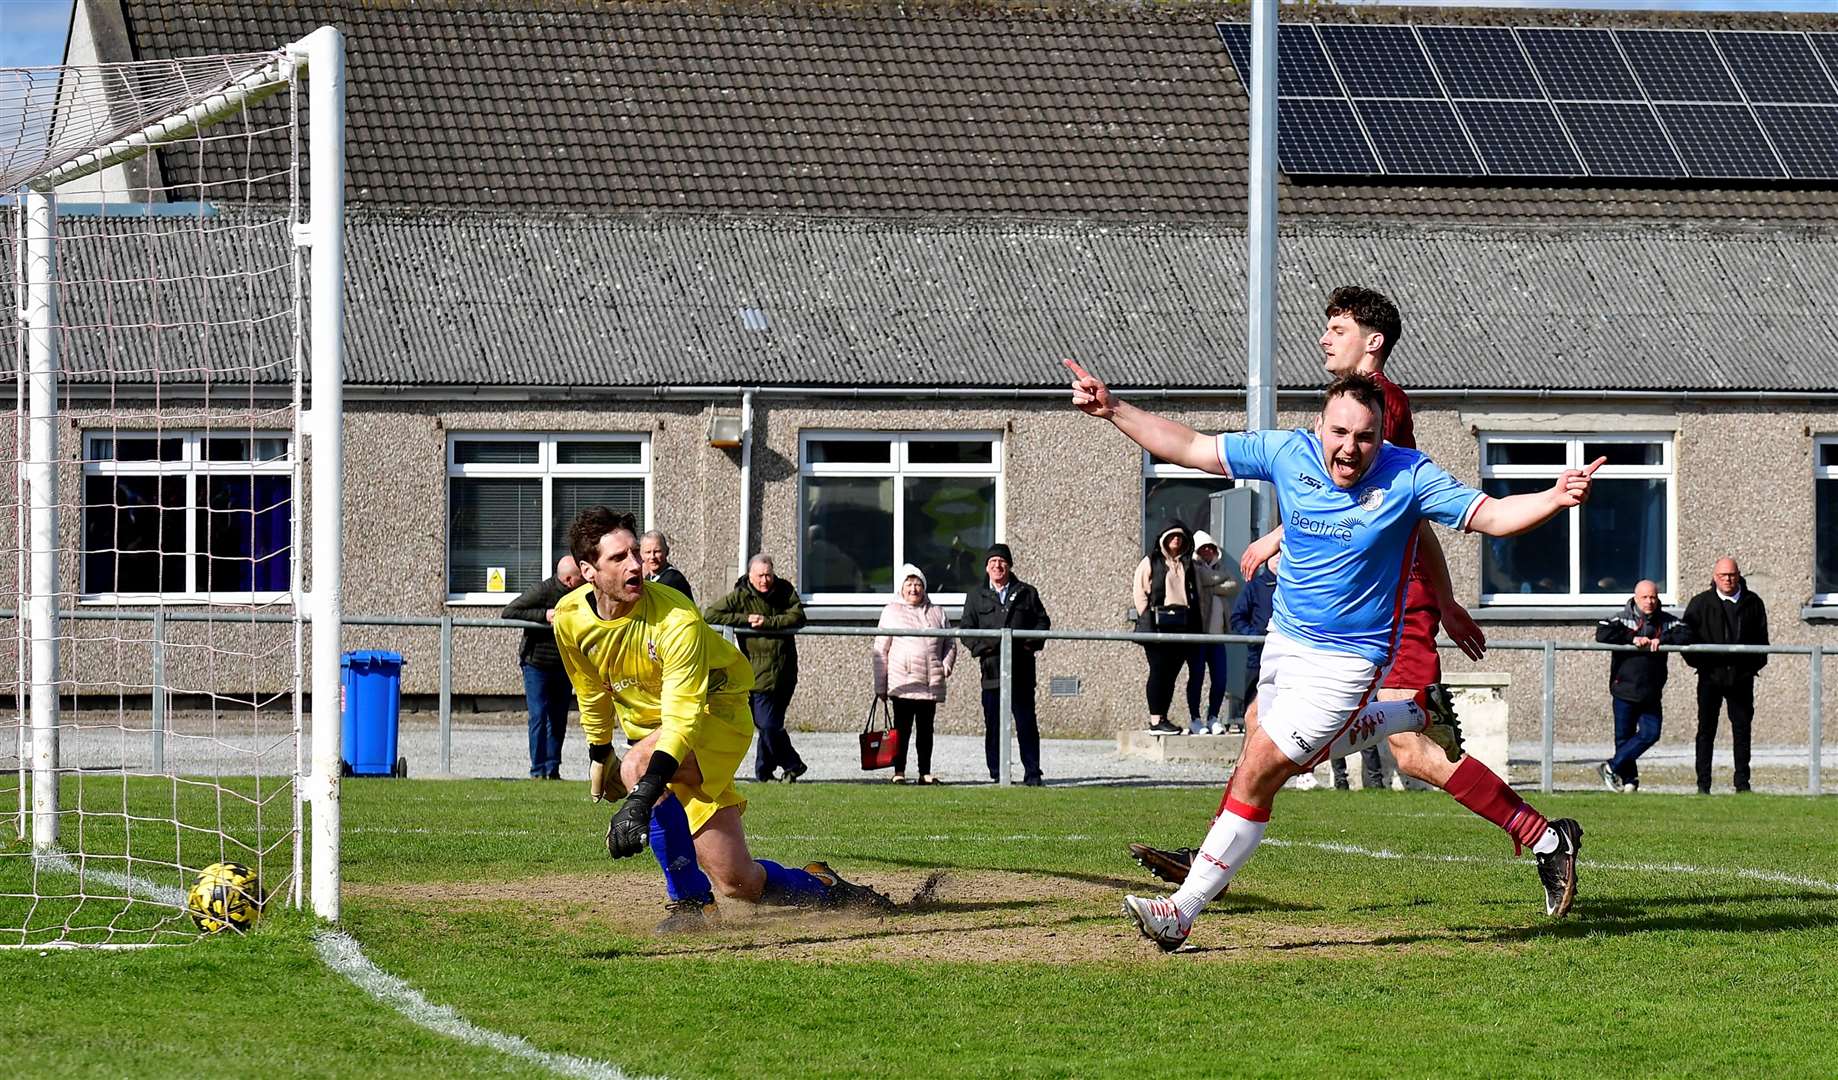 Owen Harrold turns to celebrate after scoring in Wick Academy's 4-0 victory at Kynoch Park. Picture: Mel Roger